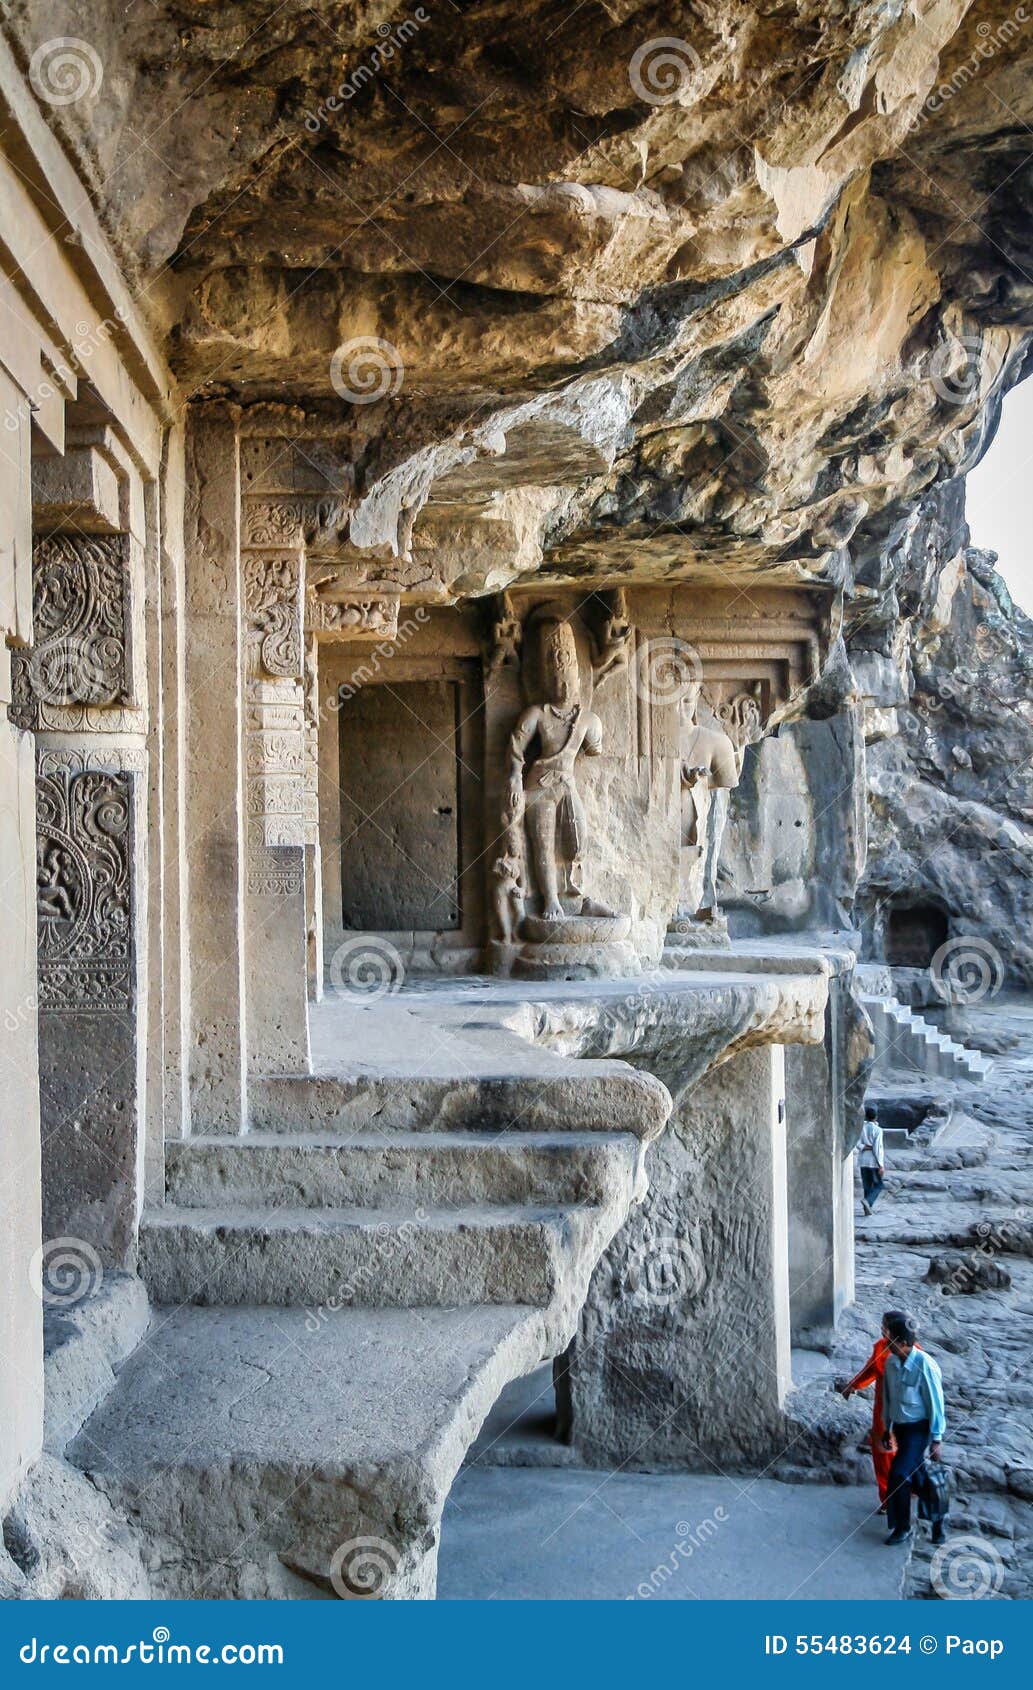 Indian couple visiting Ellora caves. Indian couple visiting Jain temple carved out of a giant solid rock in Ellora, India